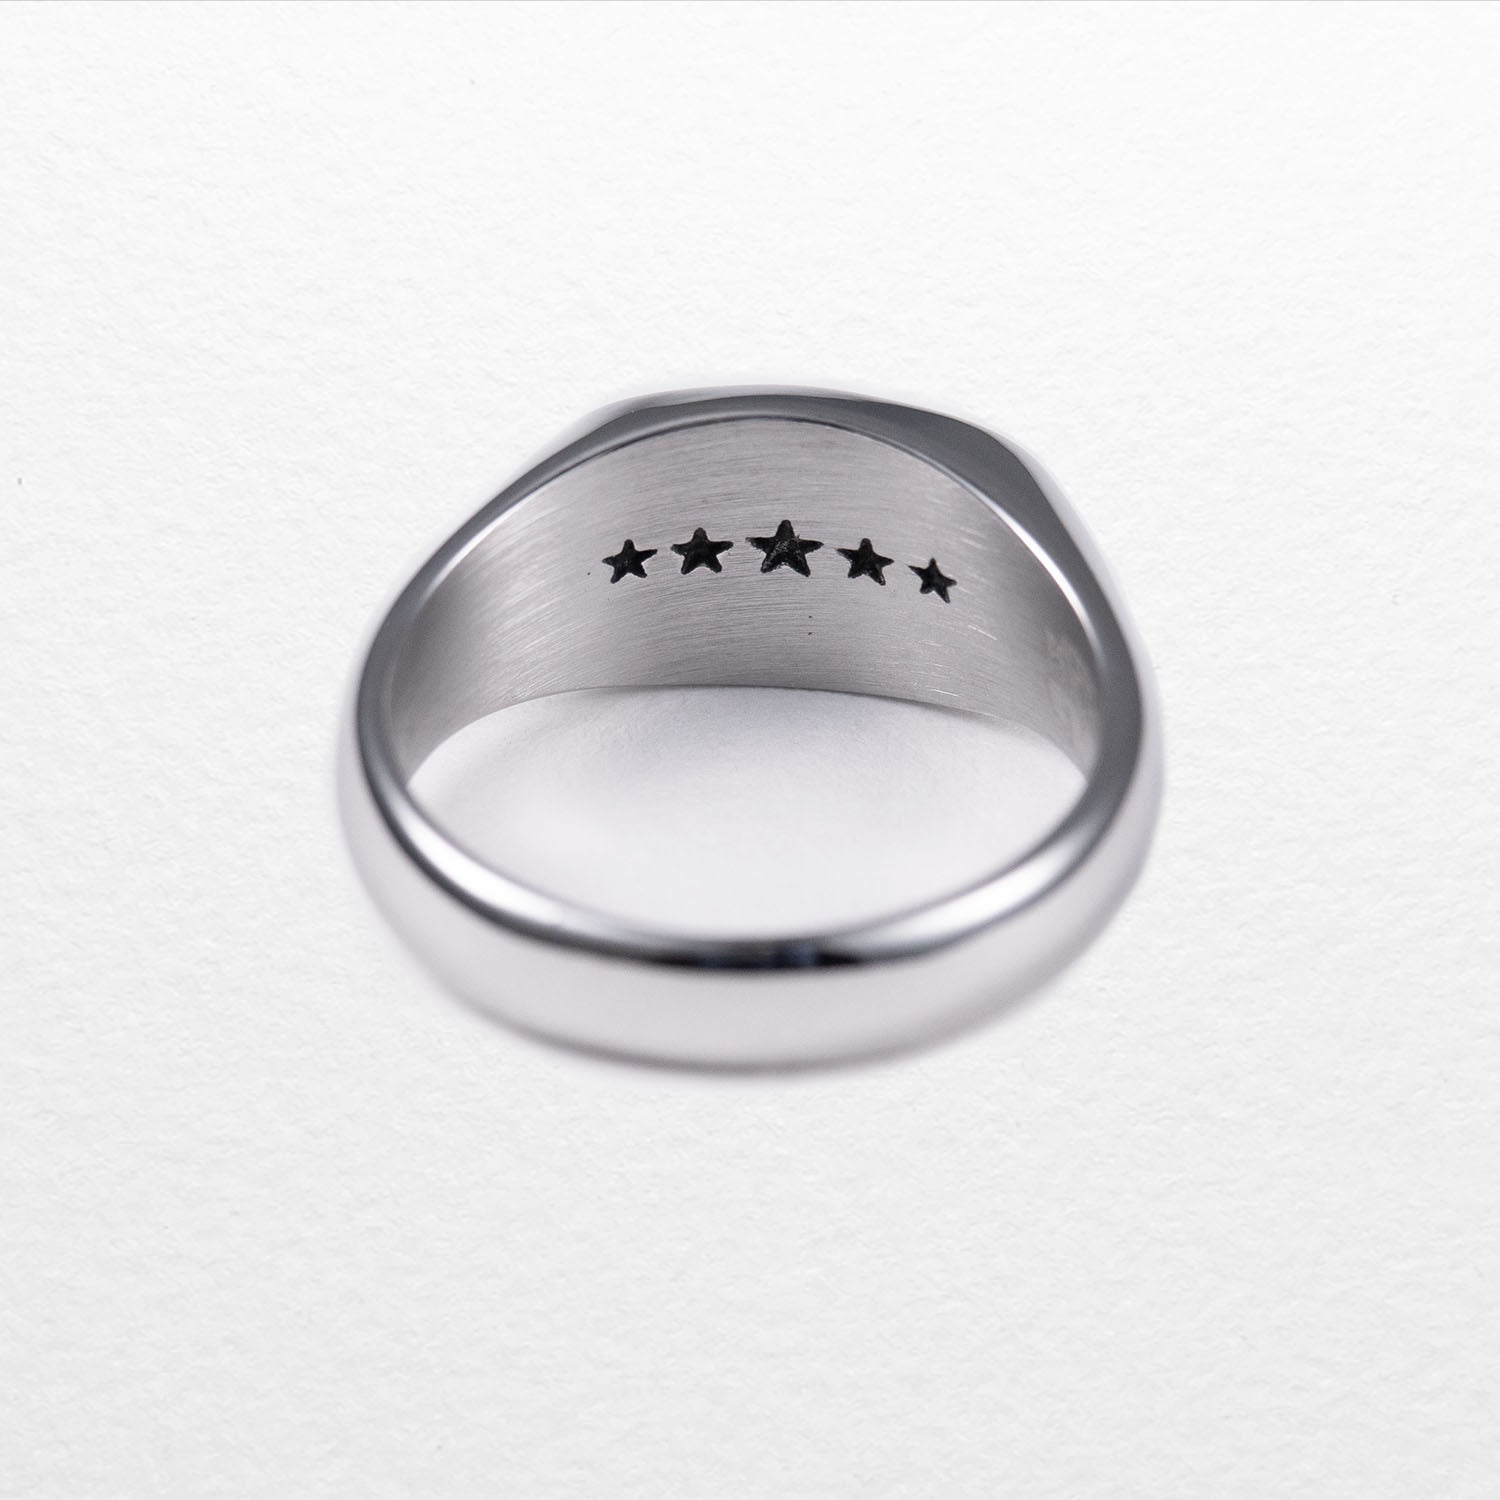 Personal Fears X American Psycho Dorsia Ring in stainless steel Inner detailing